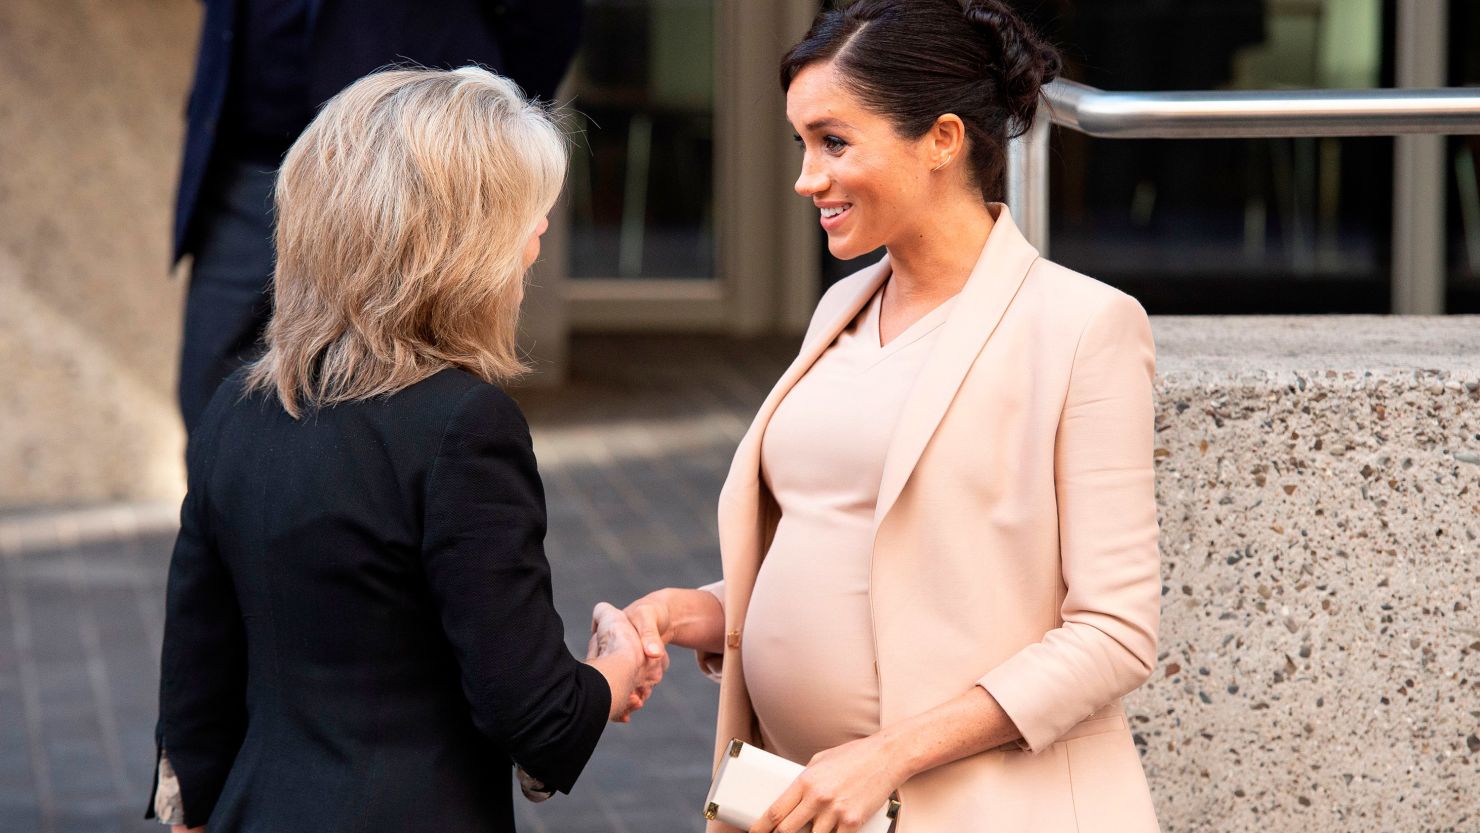 Meghan, Duchess of Sussex, made her first official visit to the National Theater since becoming a patron.